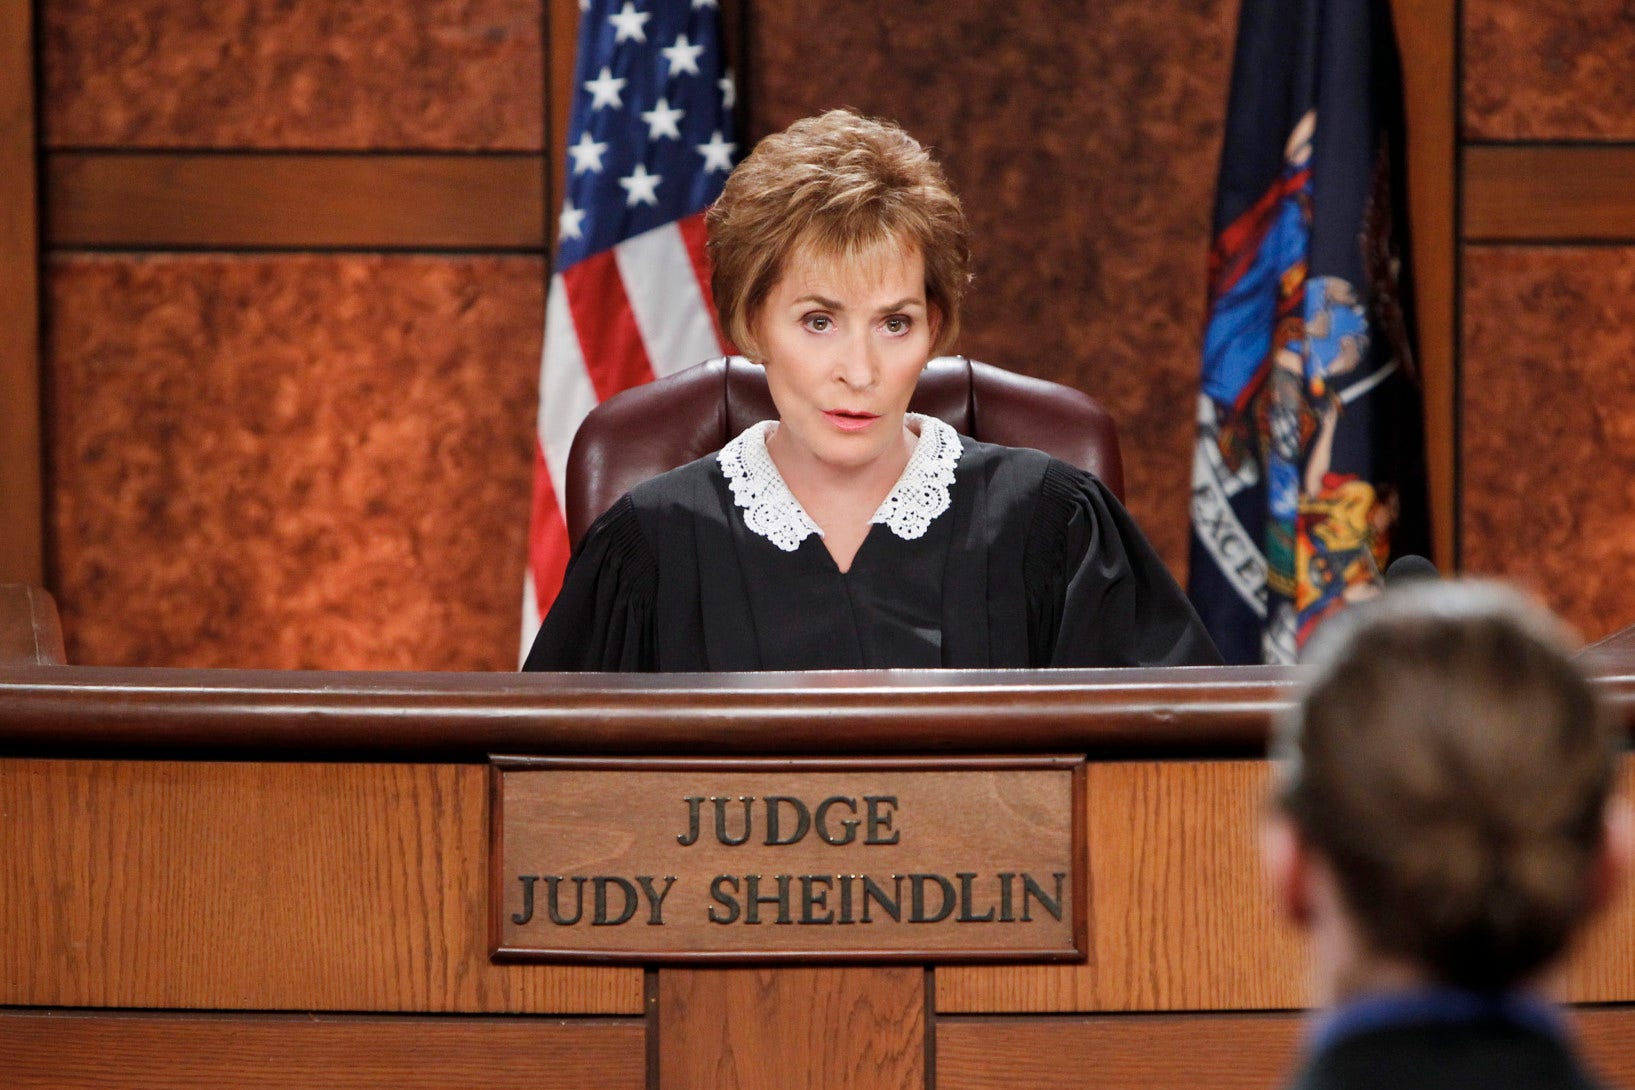 'Judge Judy' to end after Season 25 as star pivots to new series 'Judy